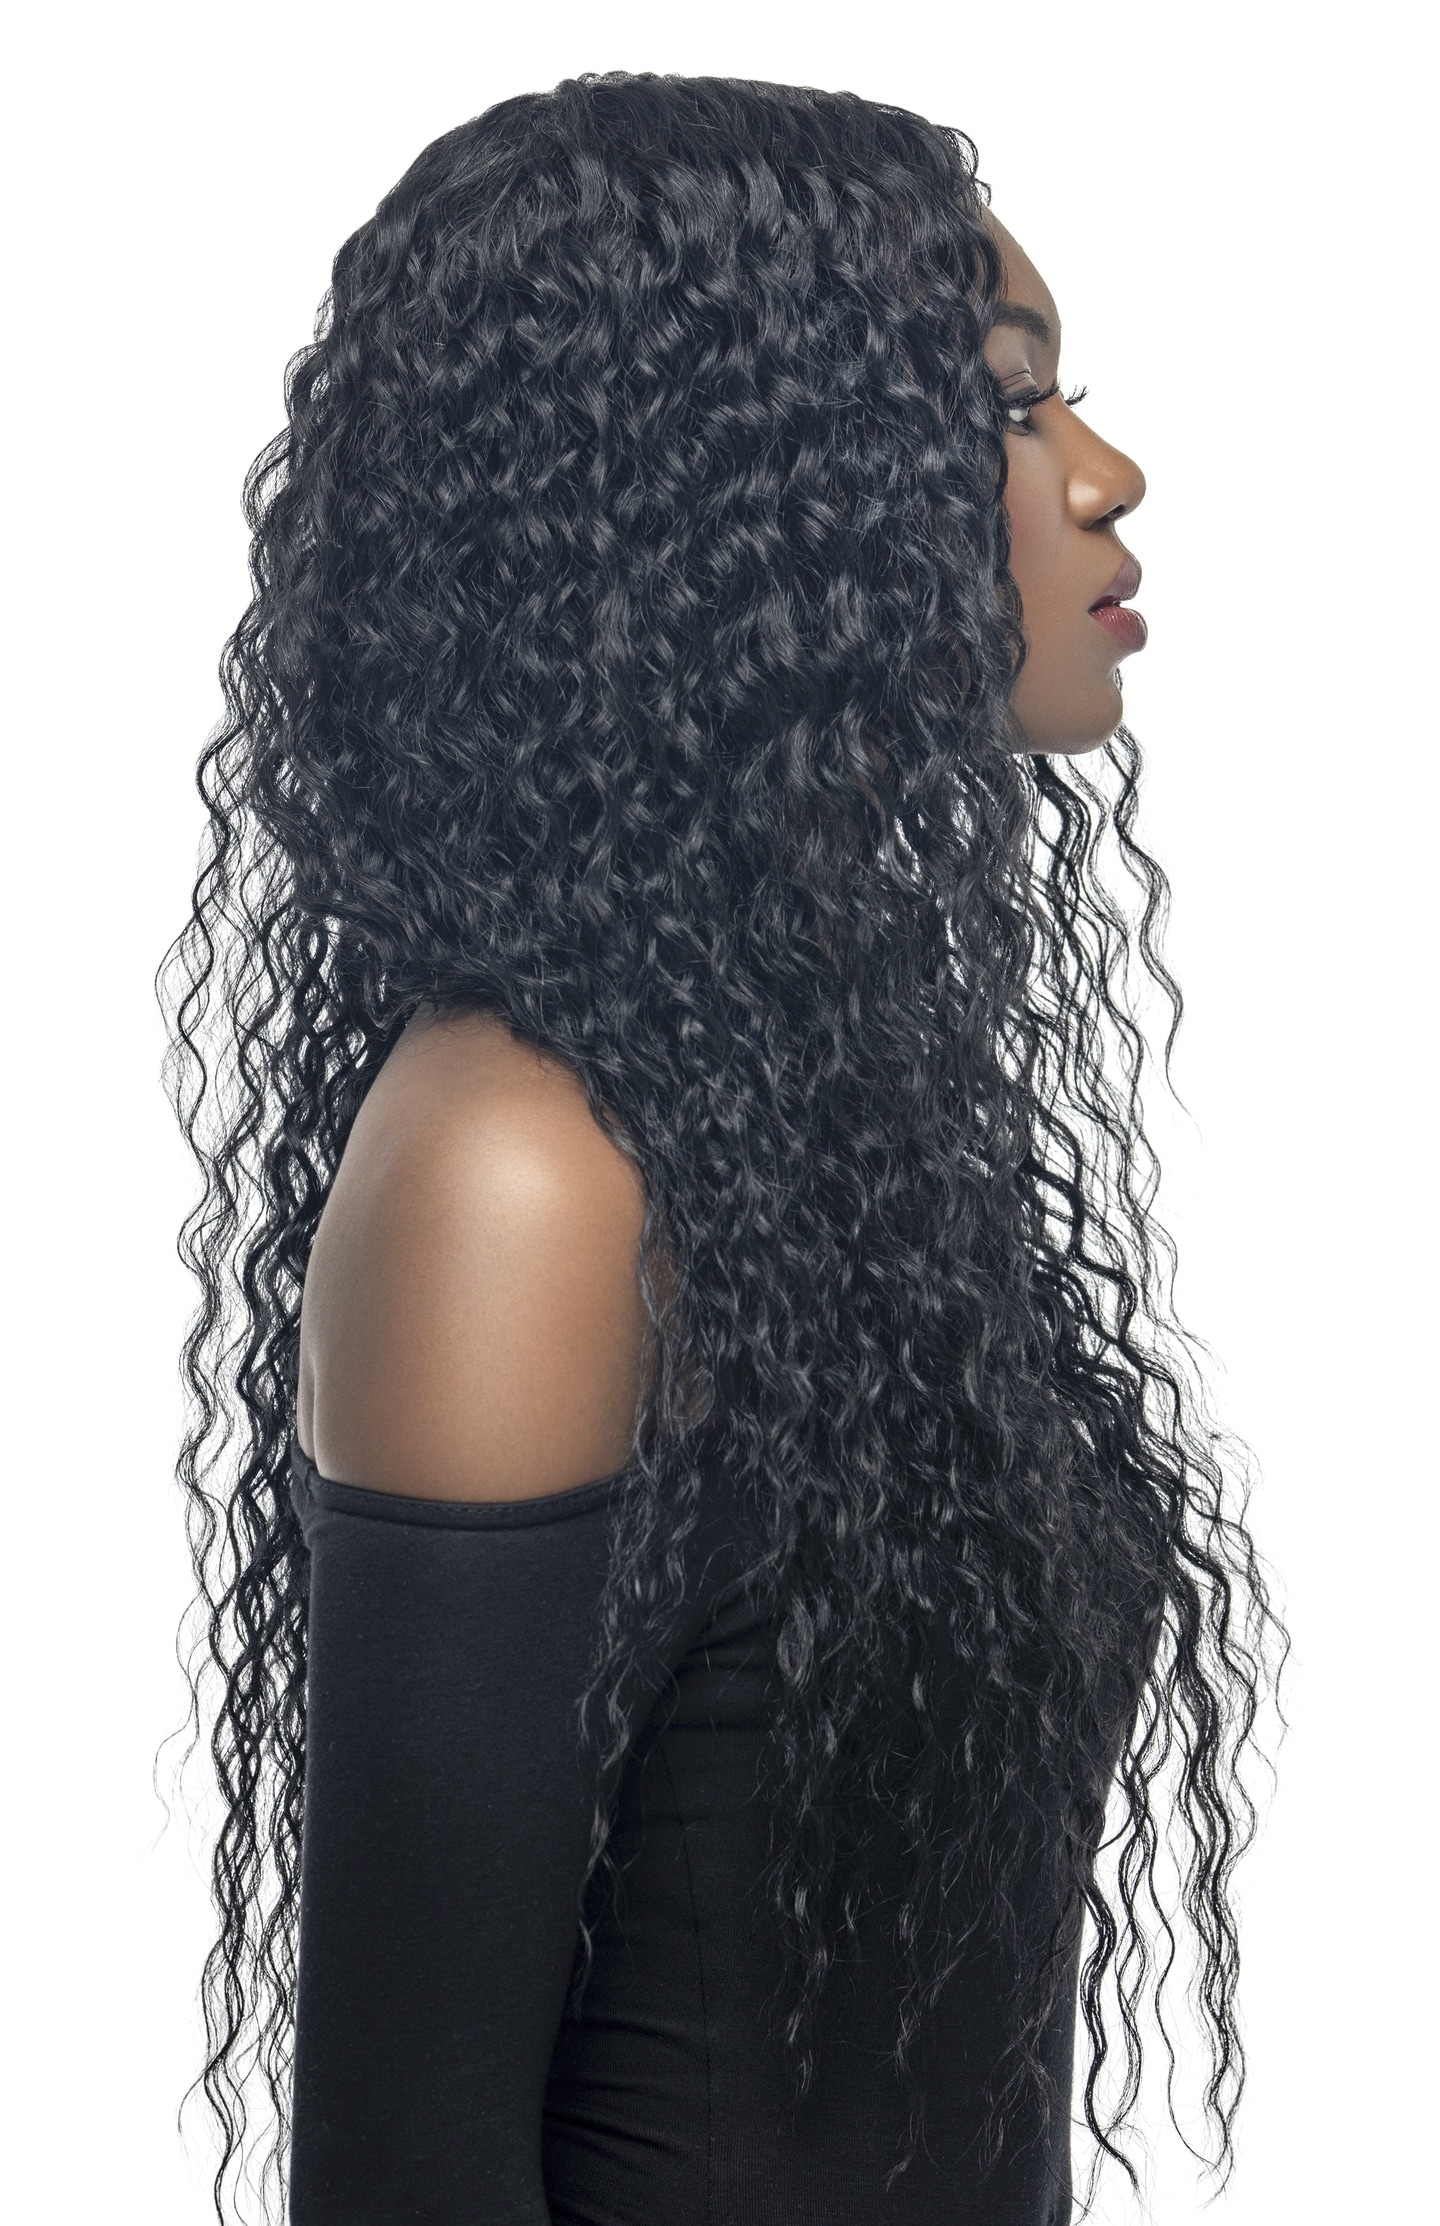 Qfitt Lace Covered Spring Wig Clips #1102 Black